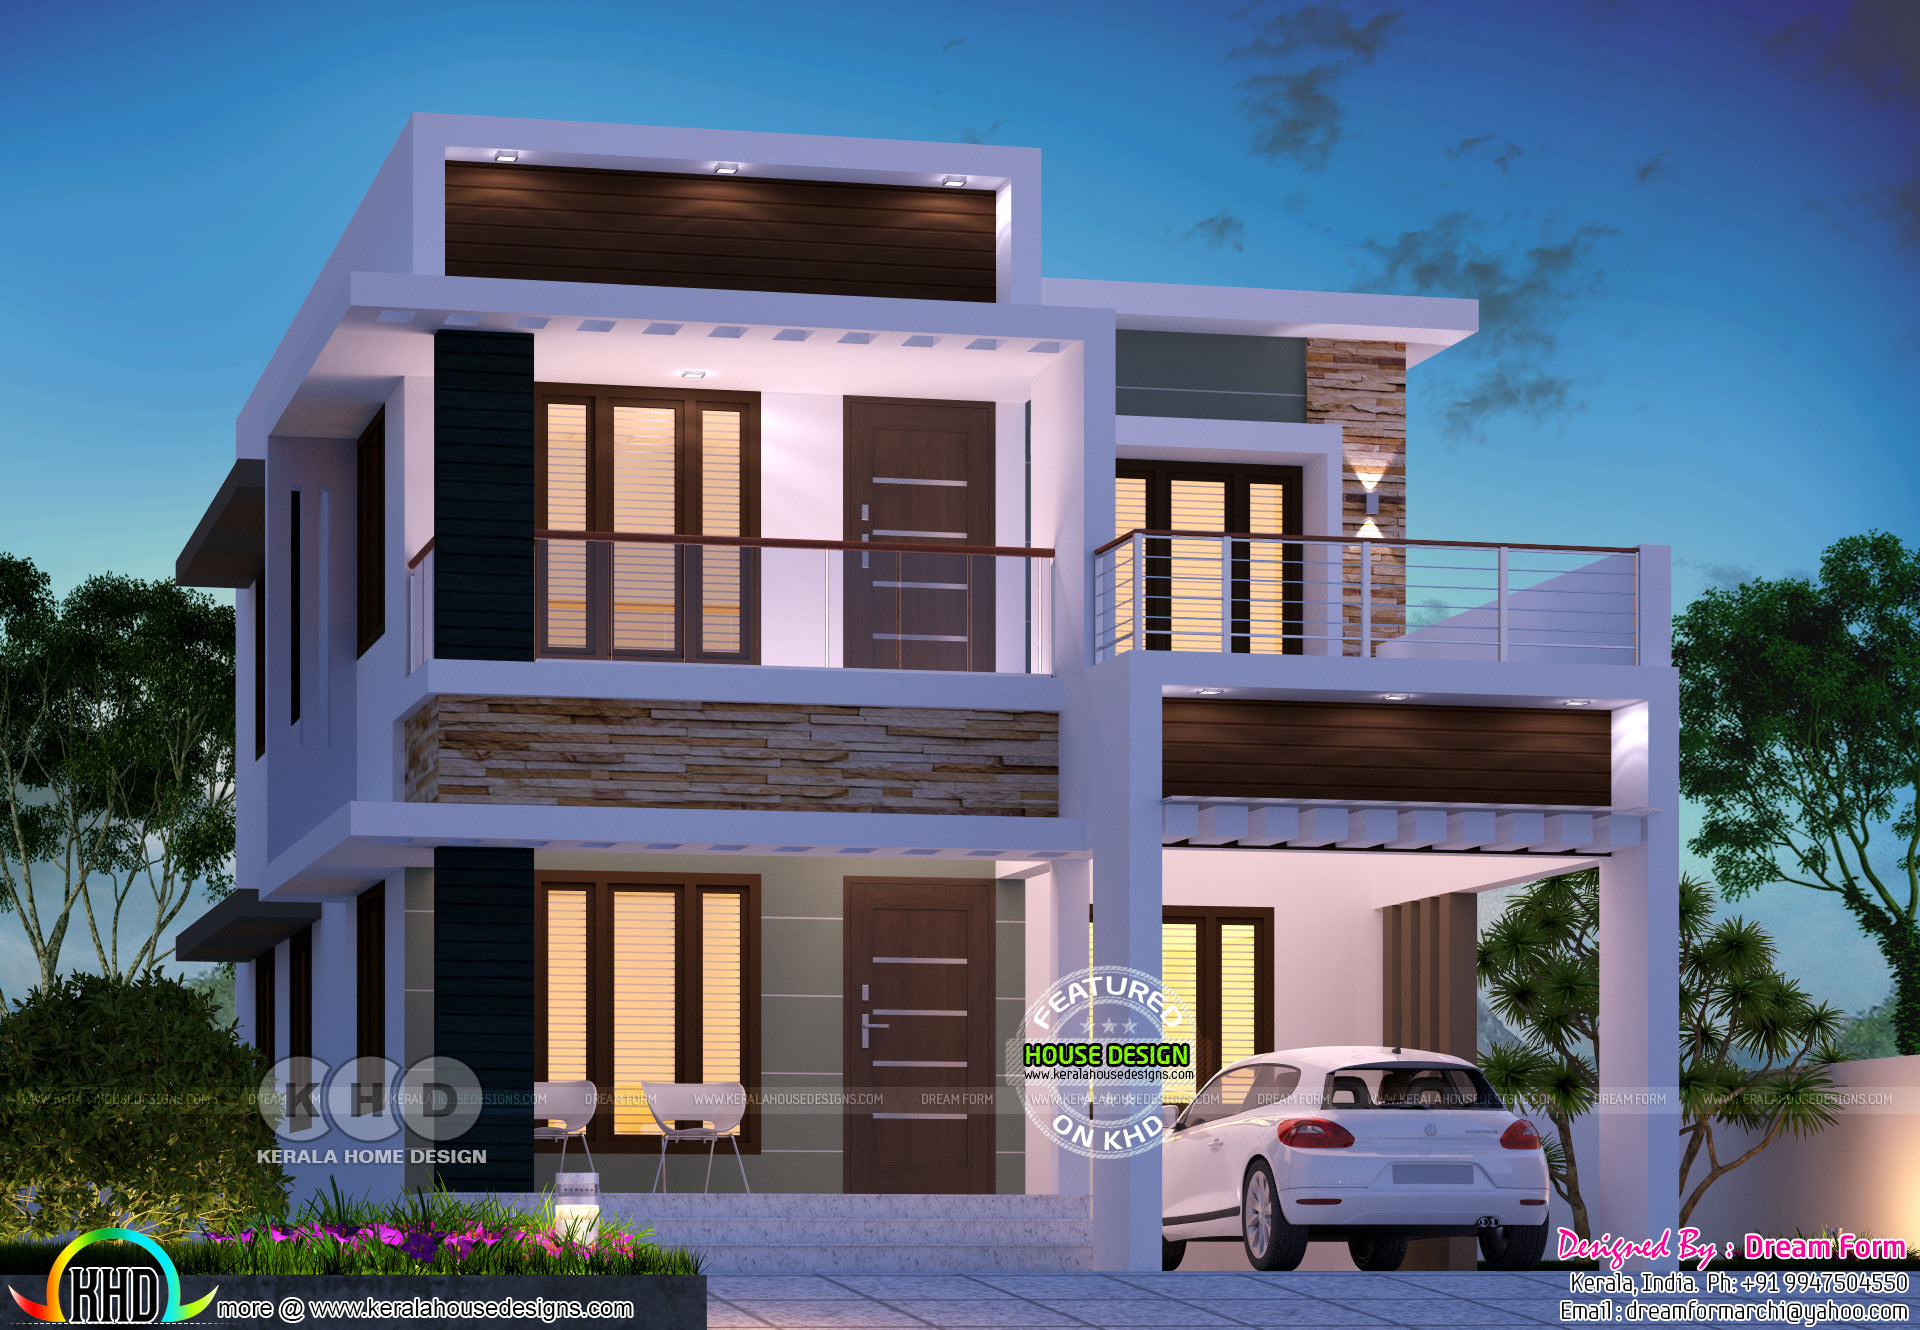 1756 Sq Ft 3 Bedroom Flat Roof Style House Kerala Home